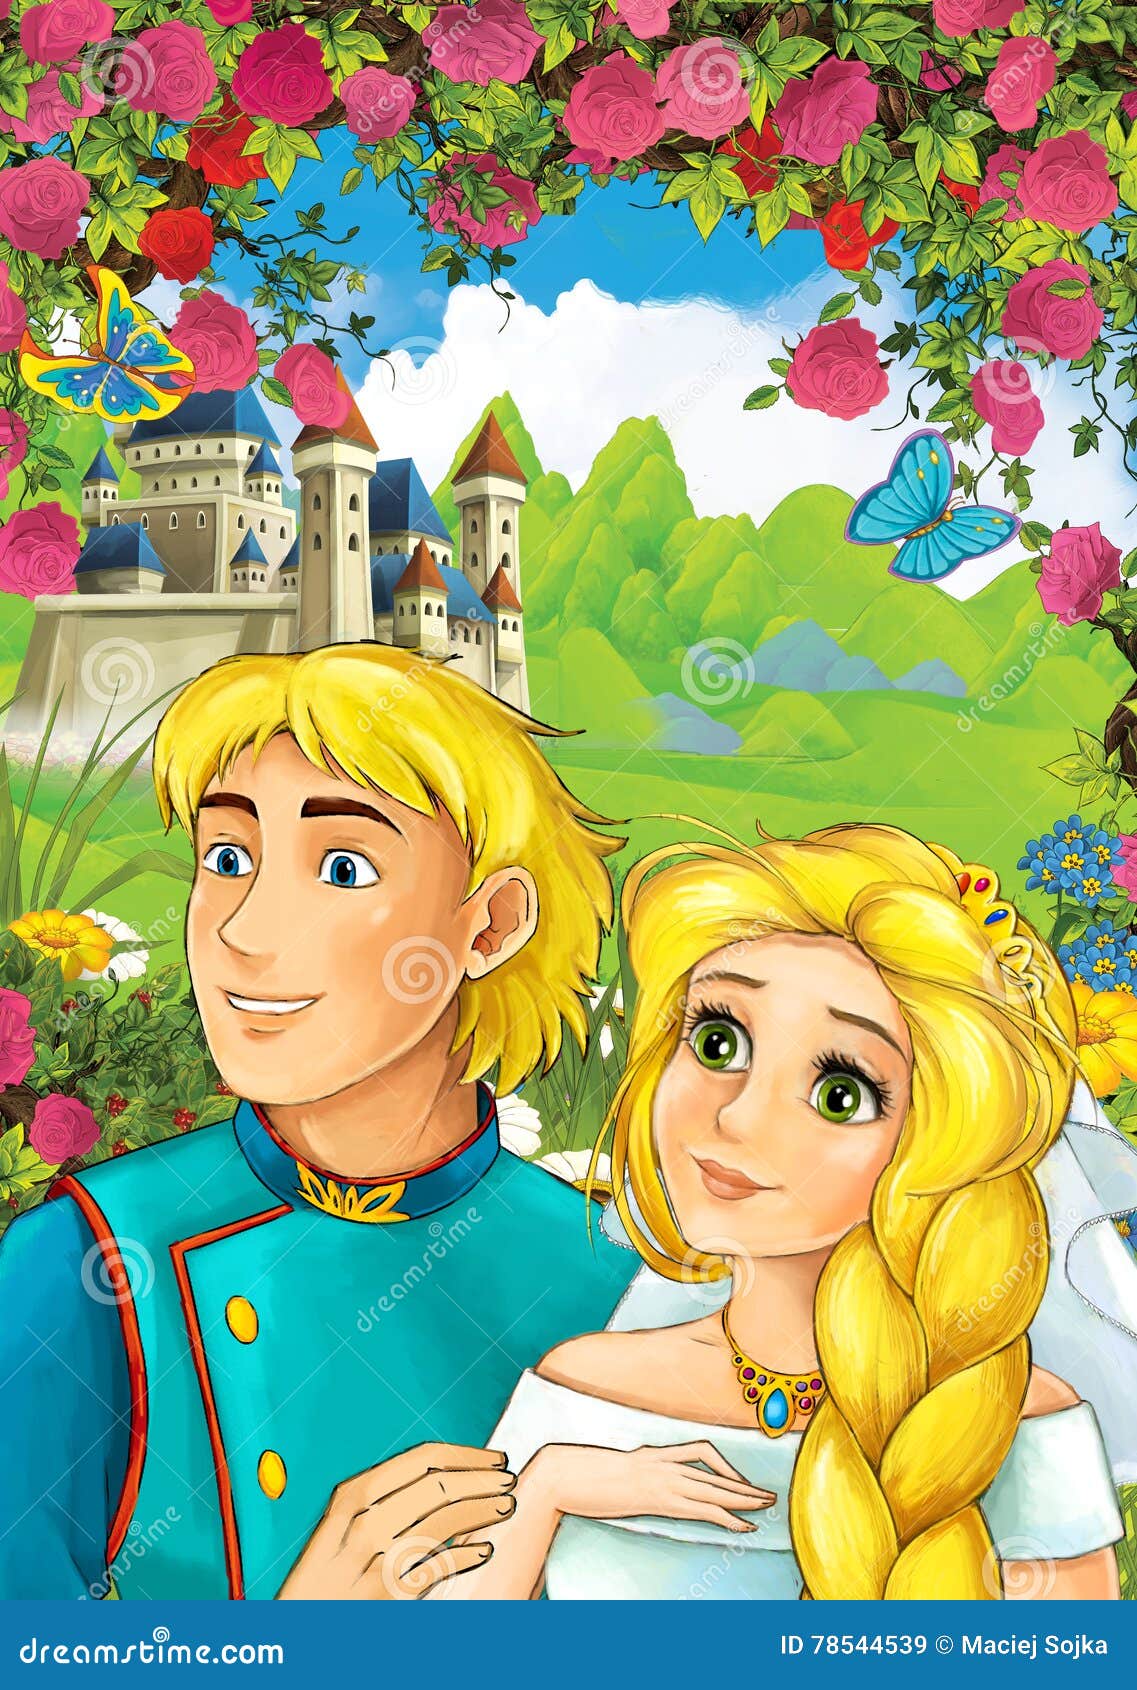 Cartoon Scene of Loving Couple - Prince and Princess - Castle in the  Background - for Different Fairy Tales Stock Illustration - Illustration of  looking, couple: 78544539